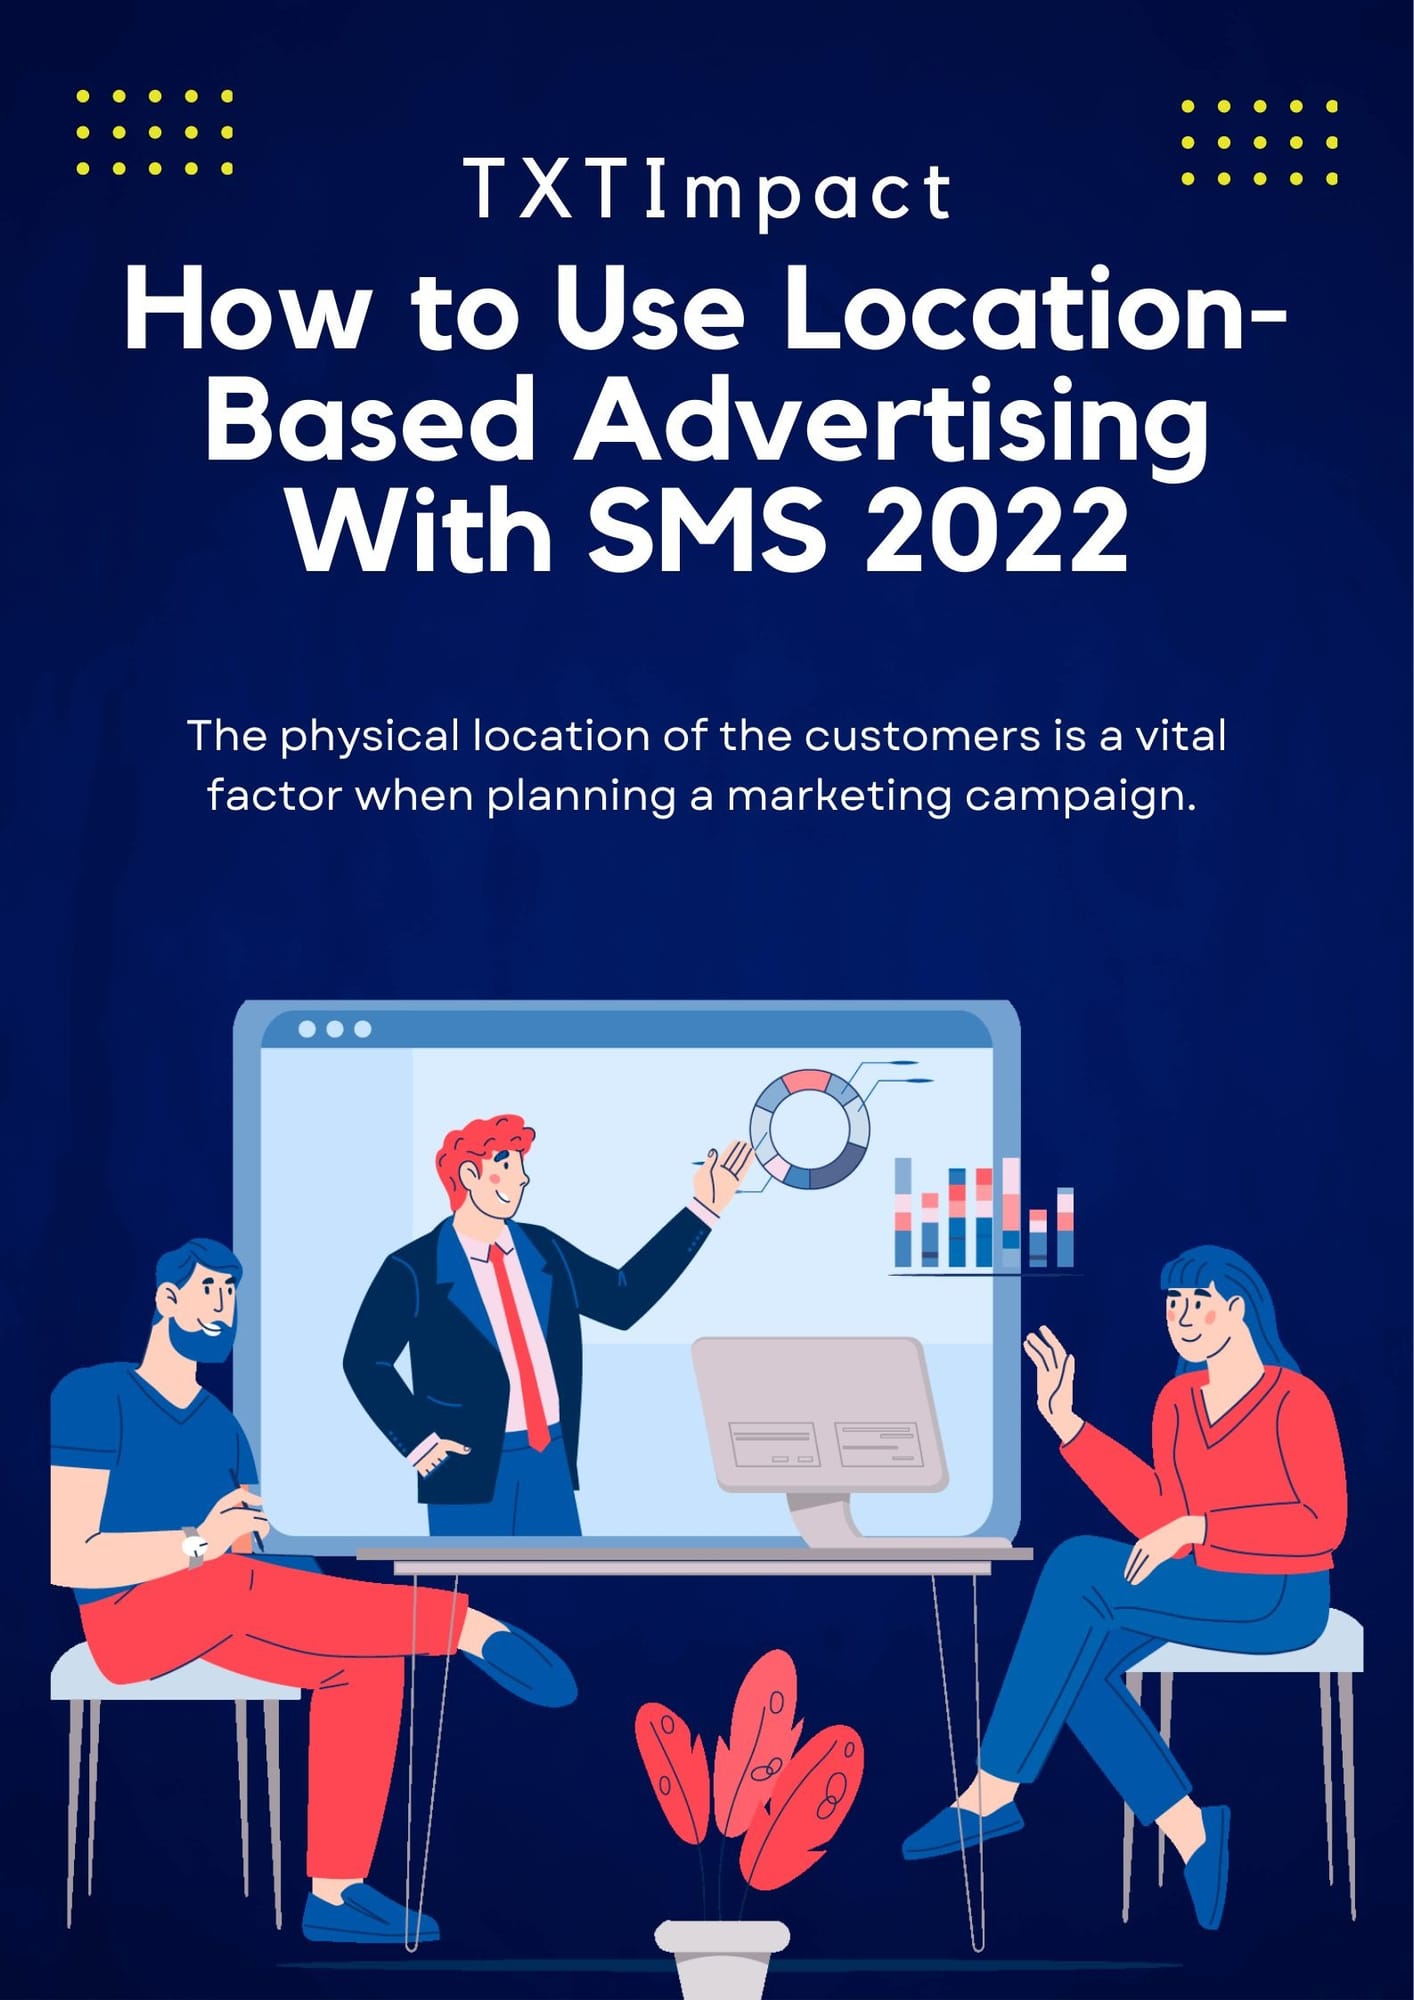 How to Use Location-Based Advertising With SMS 2022.jpg